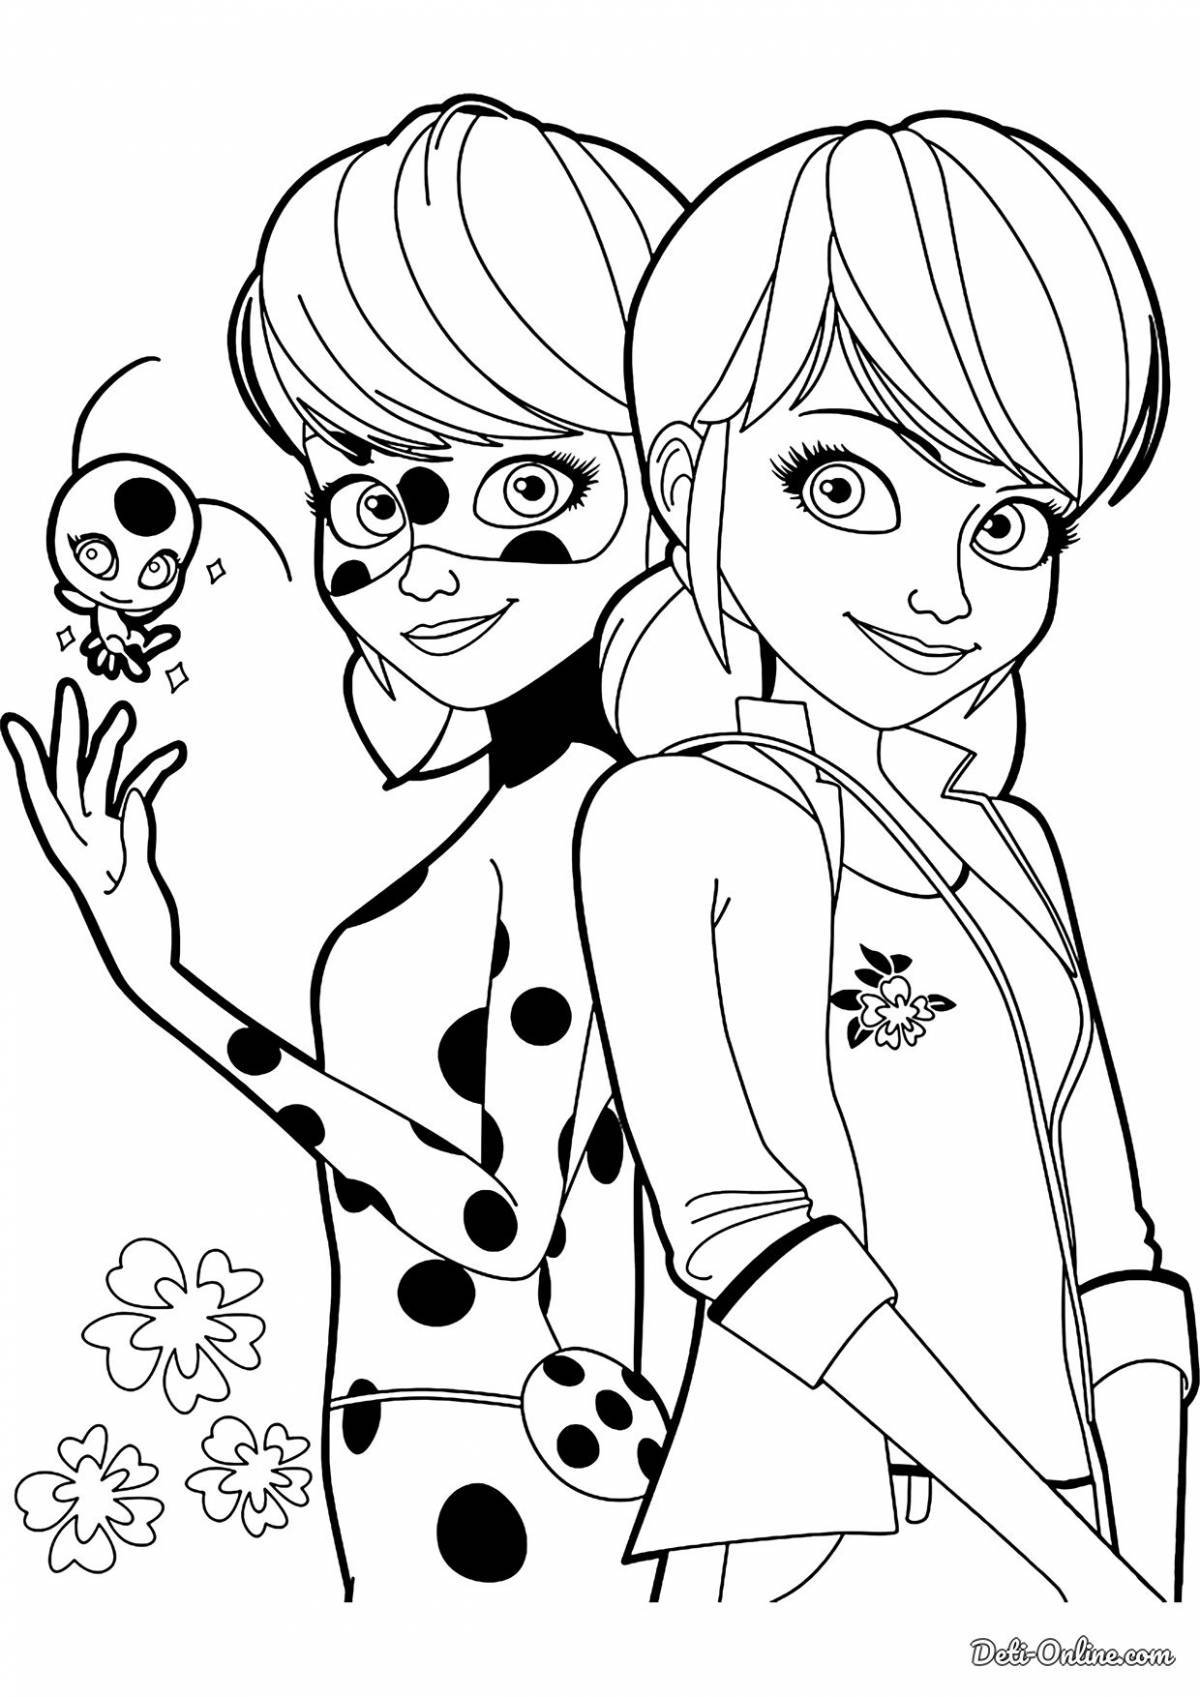 Marinette's funny coloring book